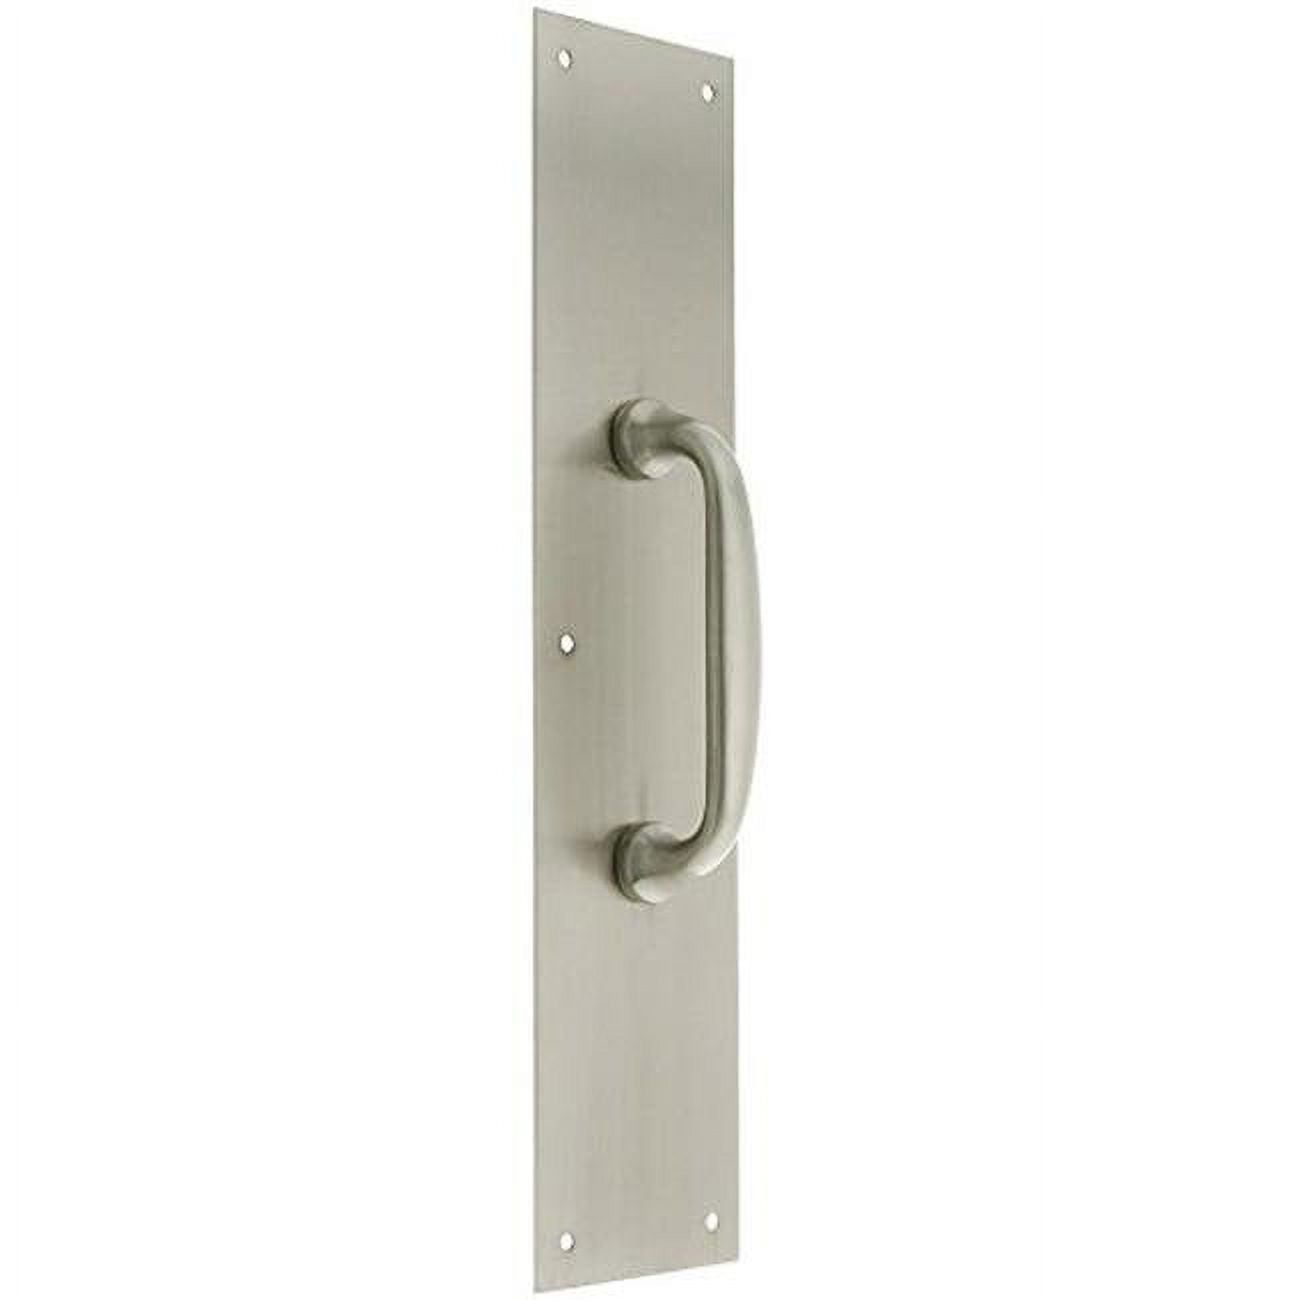 A07-p6321-630 3 X 12 In. Push Plate With Pull, Stainless Steel